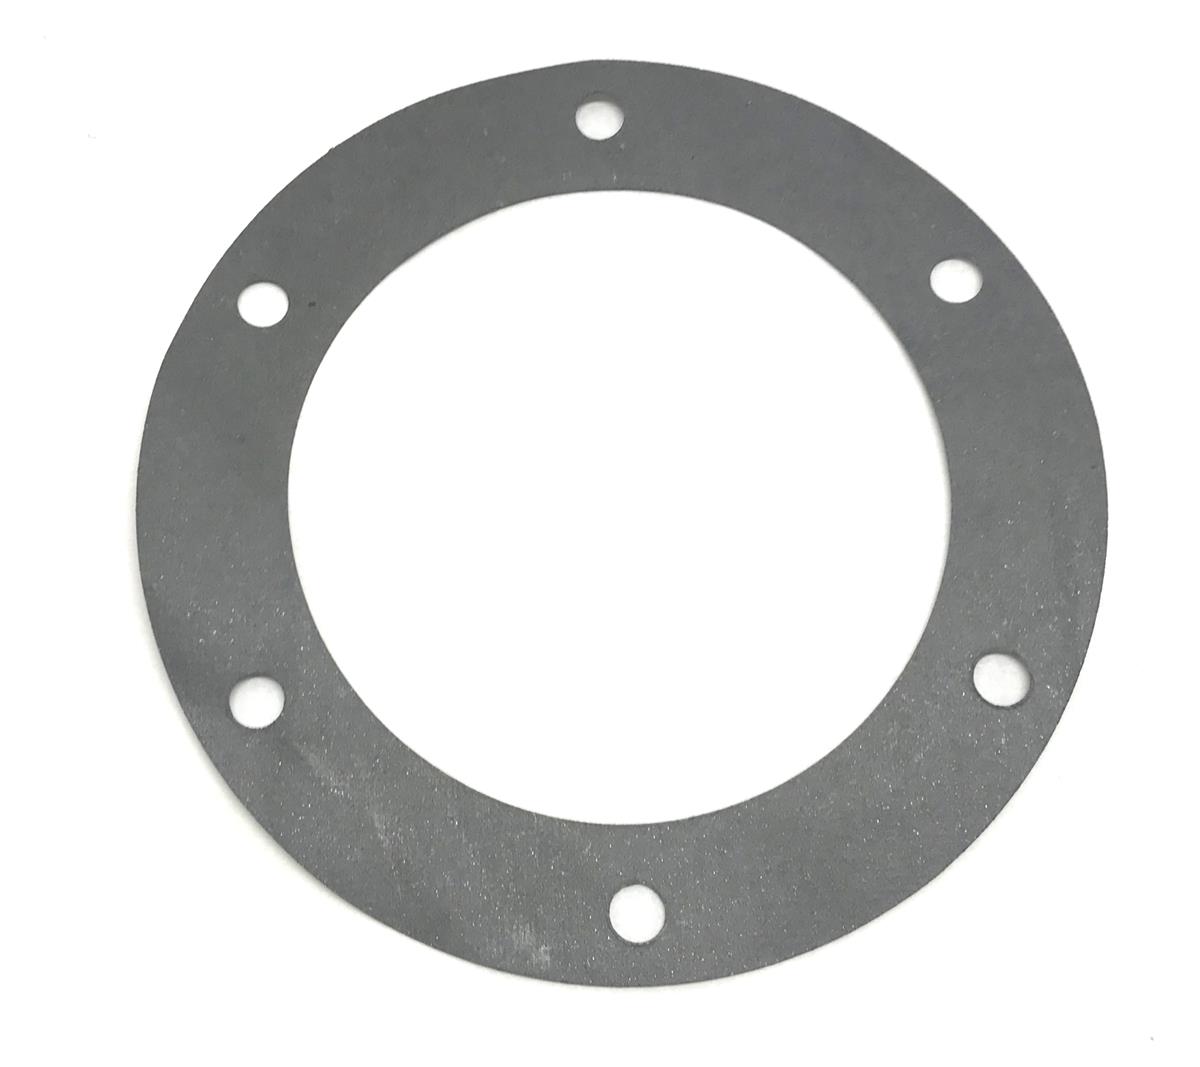 5T-801 | 5T-801  5-Ton Truck Rockwell Toploader Differential Gasket and Shim Set (9).jpg